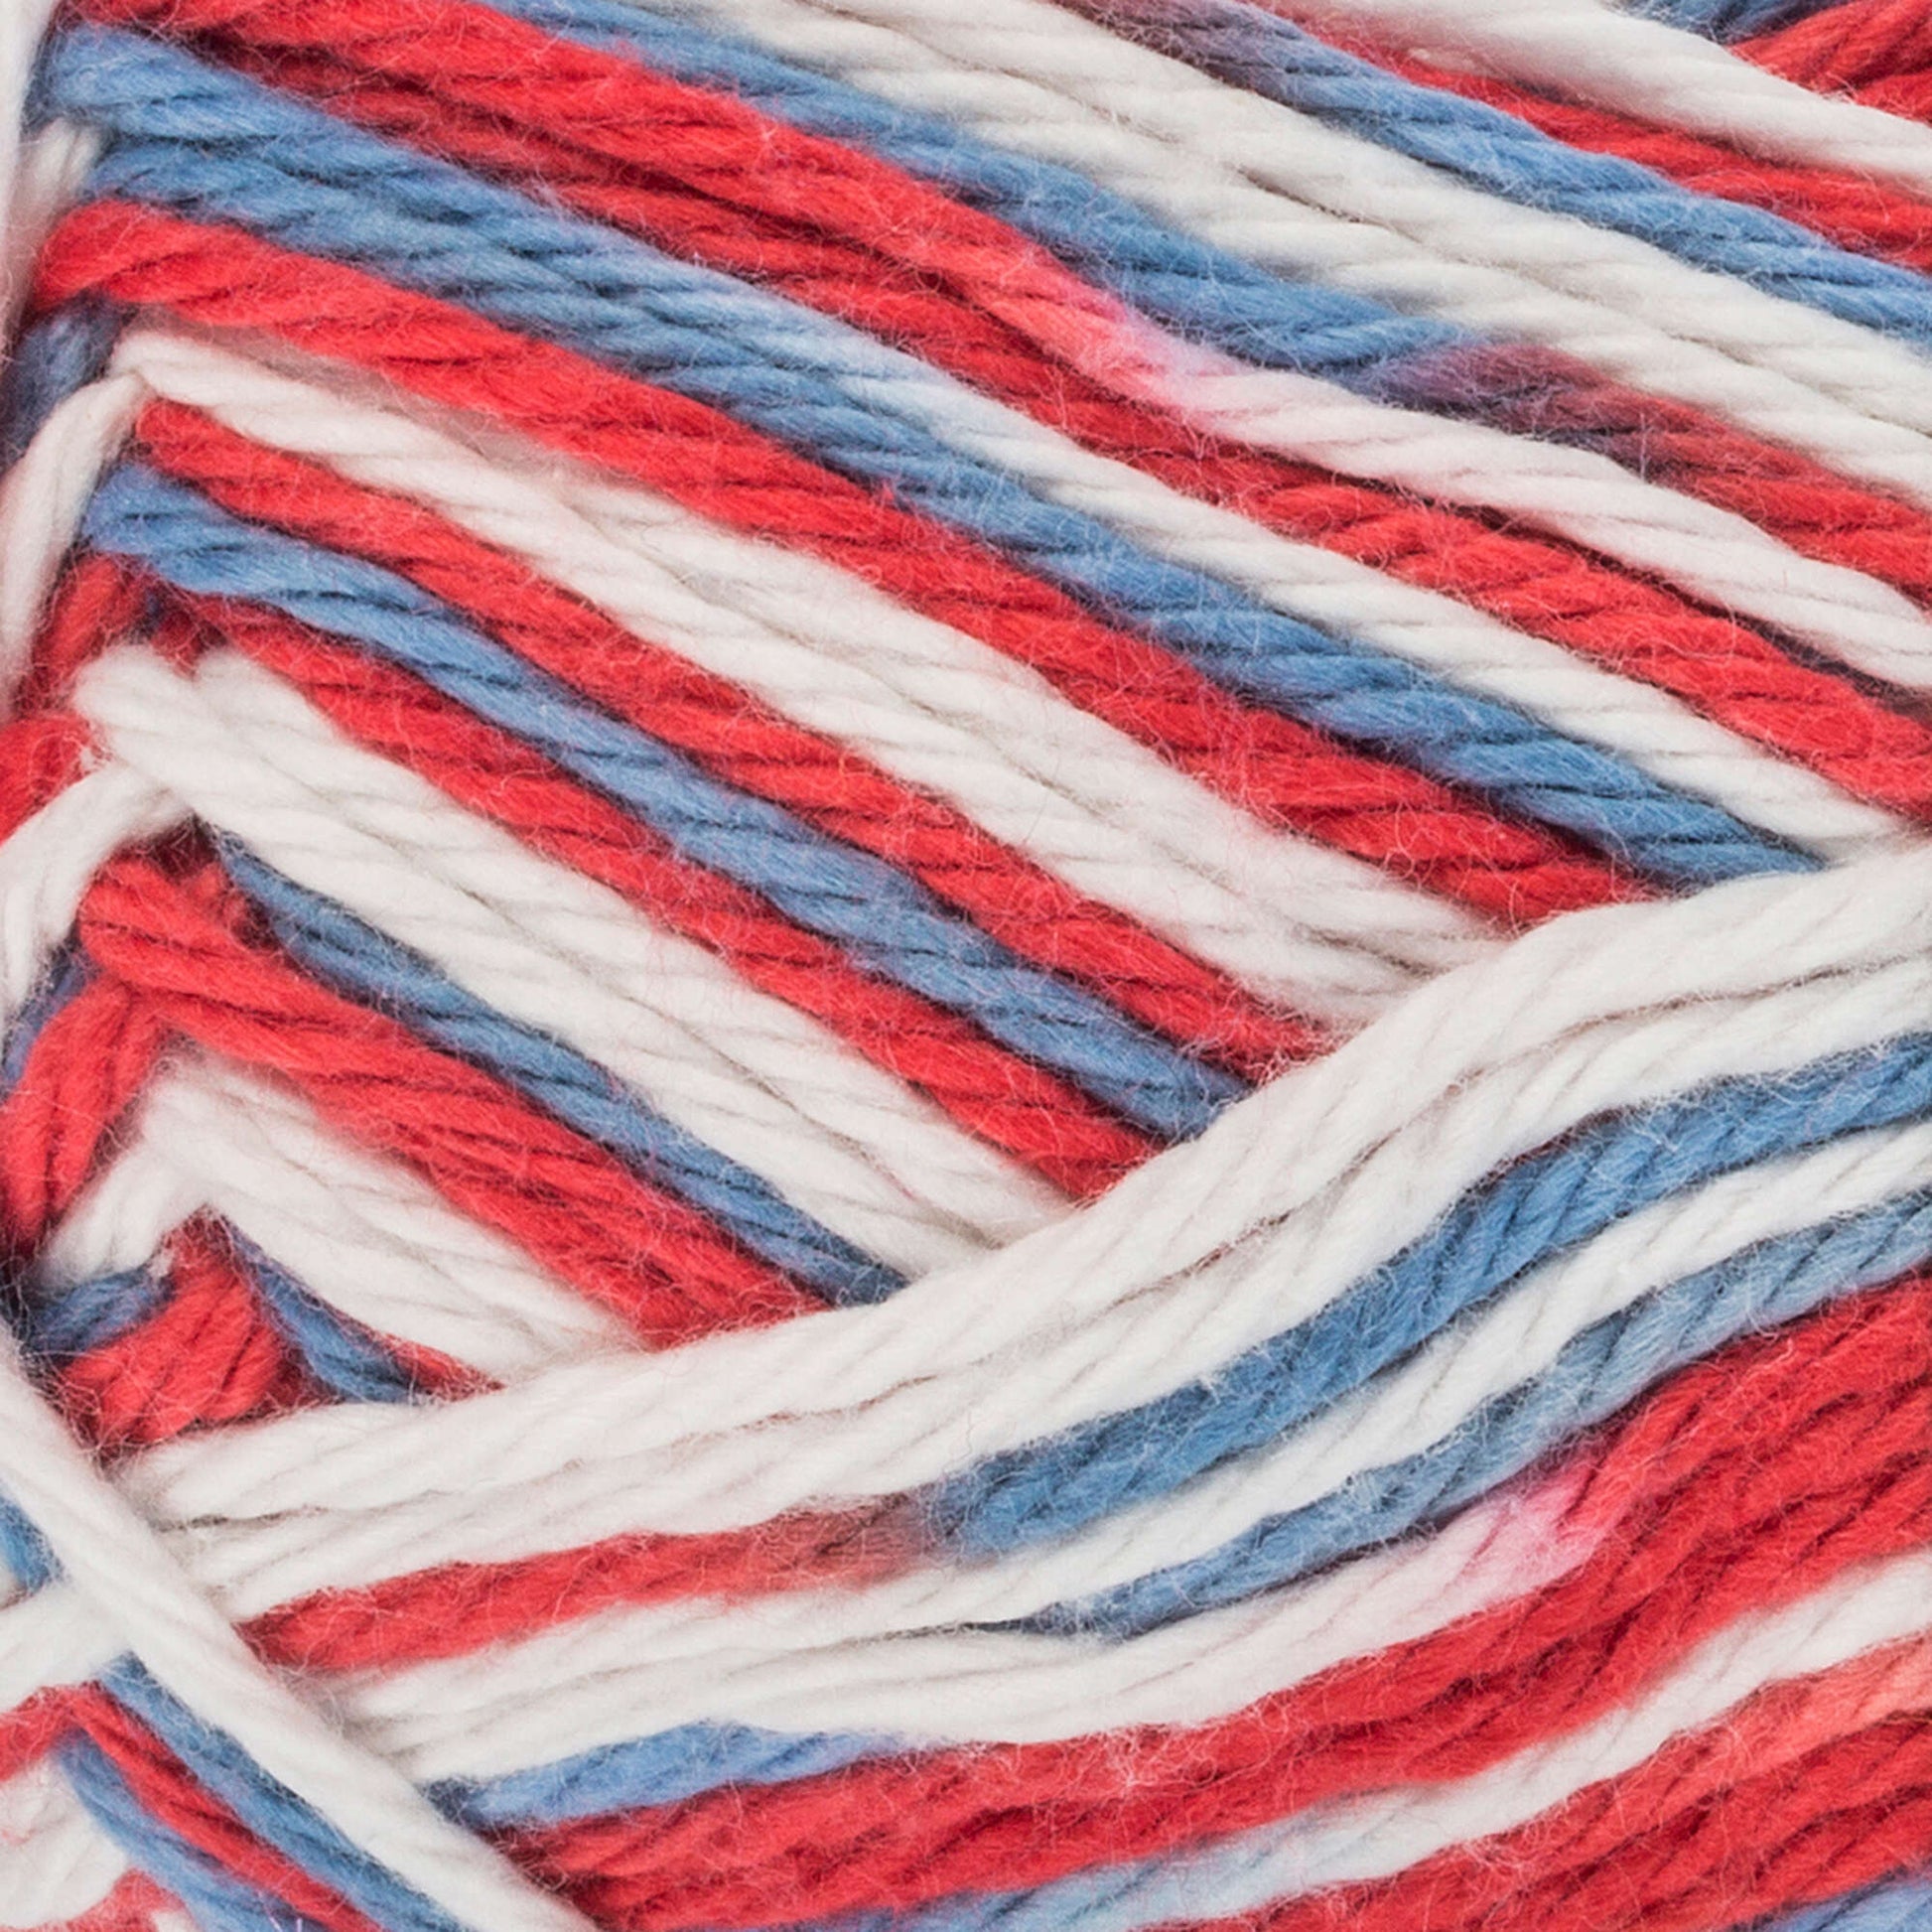 Red Heart Scrubby Smoothie Yarn - Clearance shades Nautical